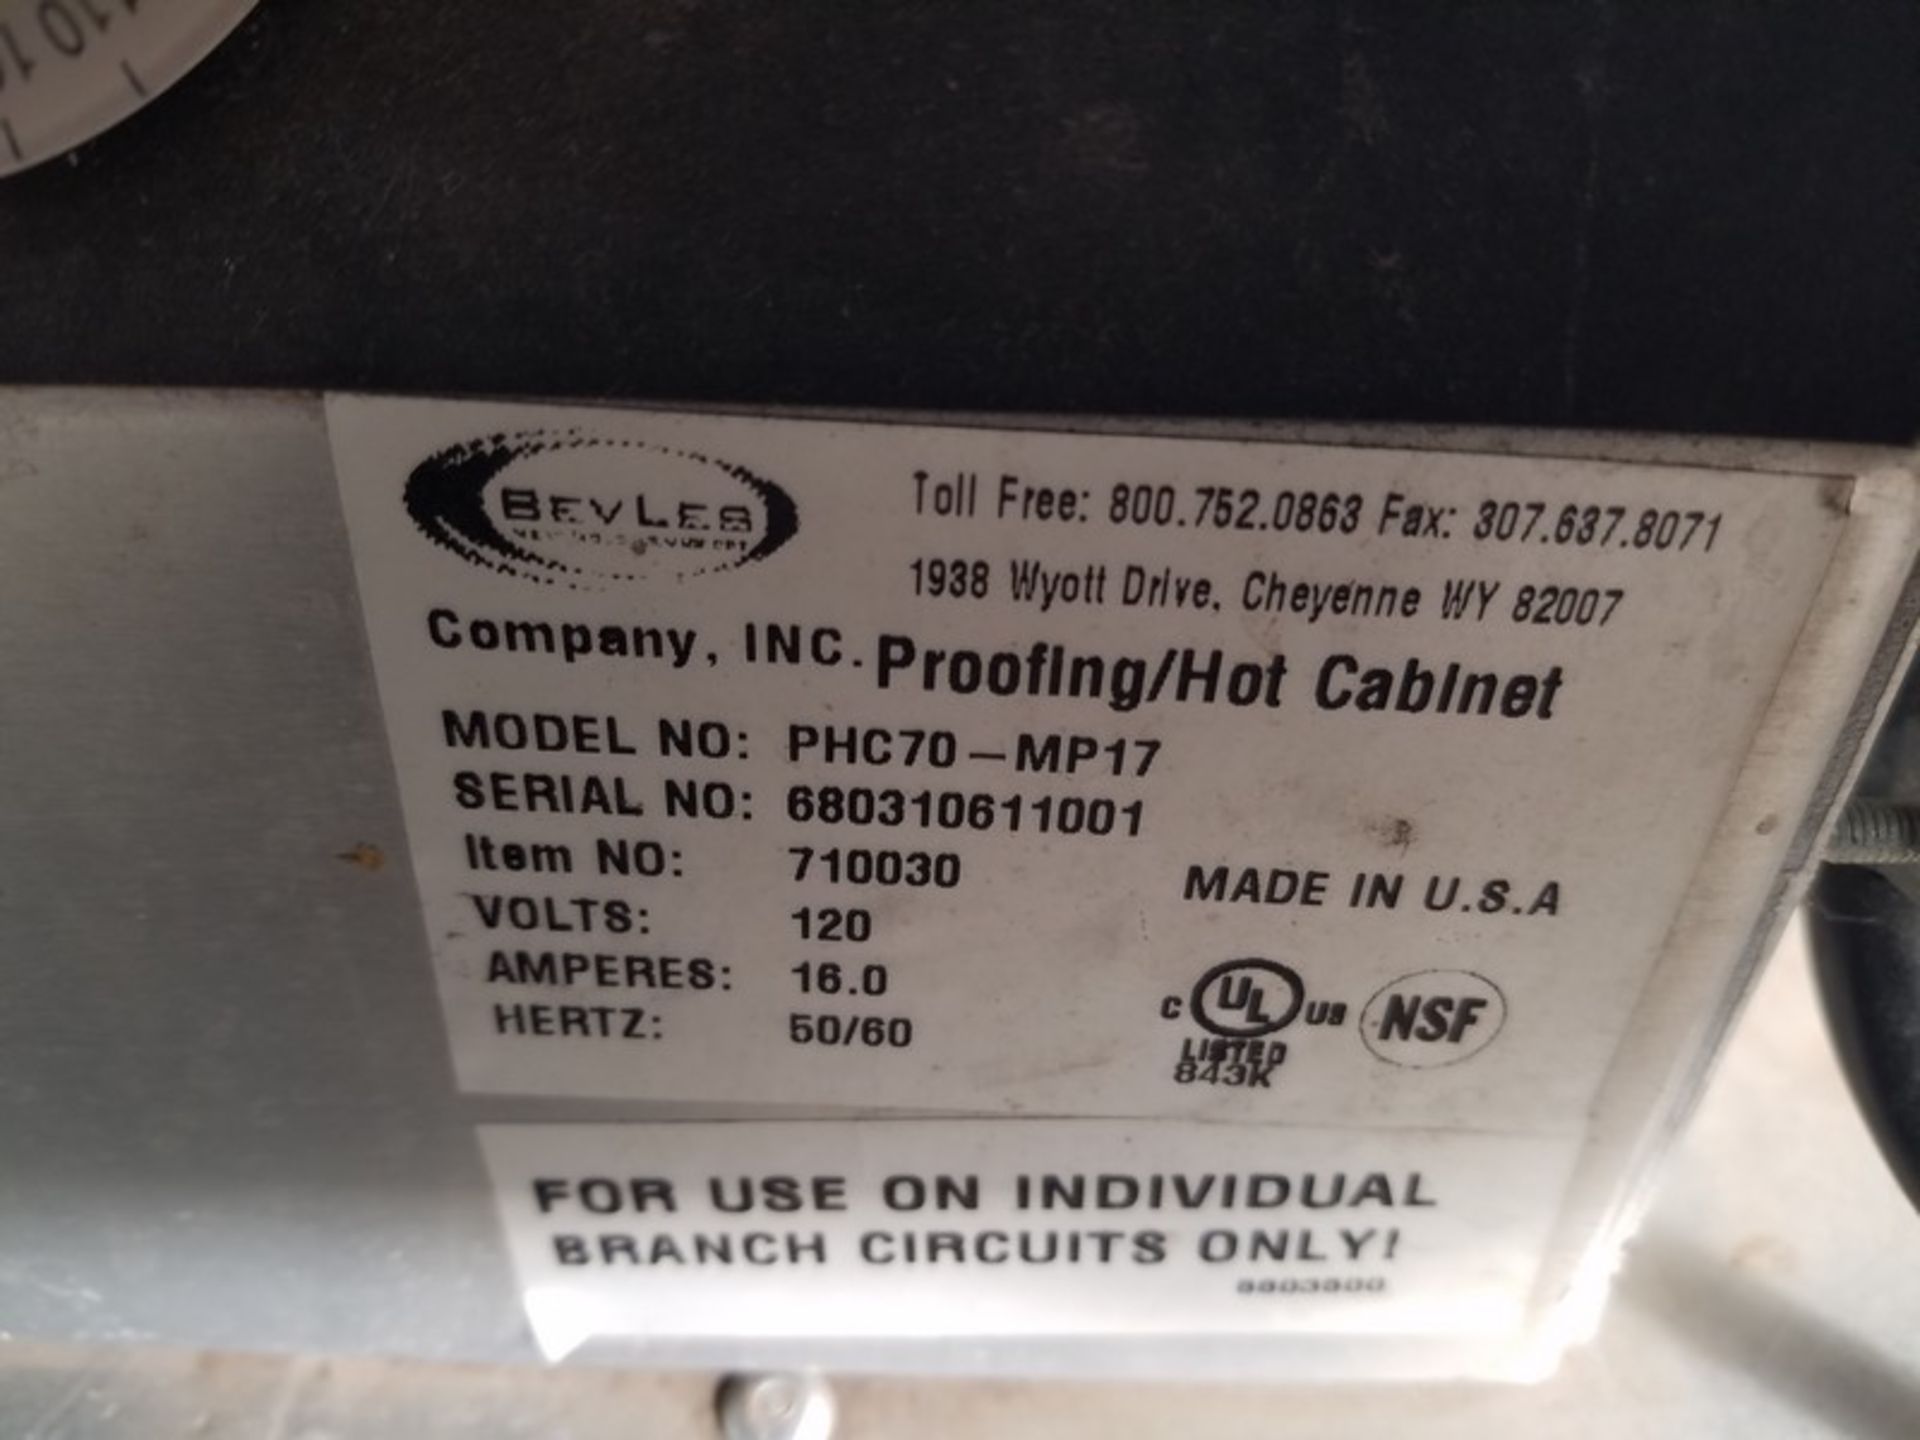 Bevles PHC70-MP17 proofing / hot cabinet, serial # 680310611001, volt 120, casters (Loading Fee $50 - Image 4 of 4